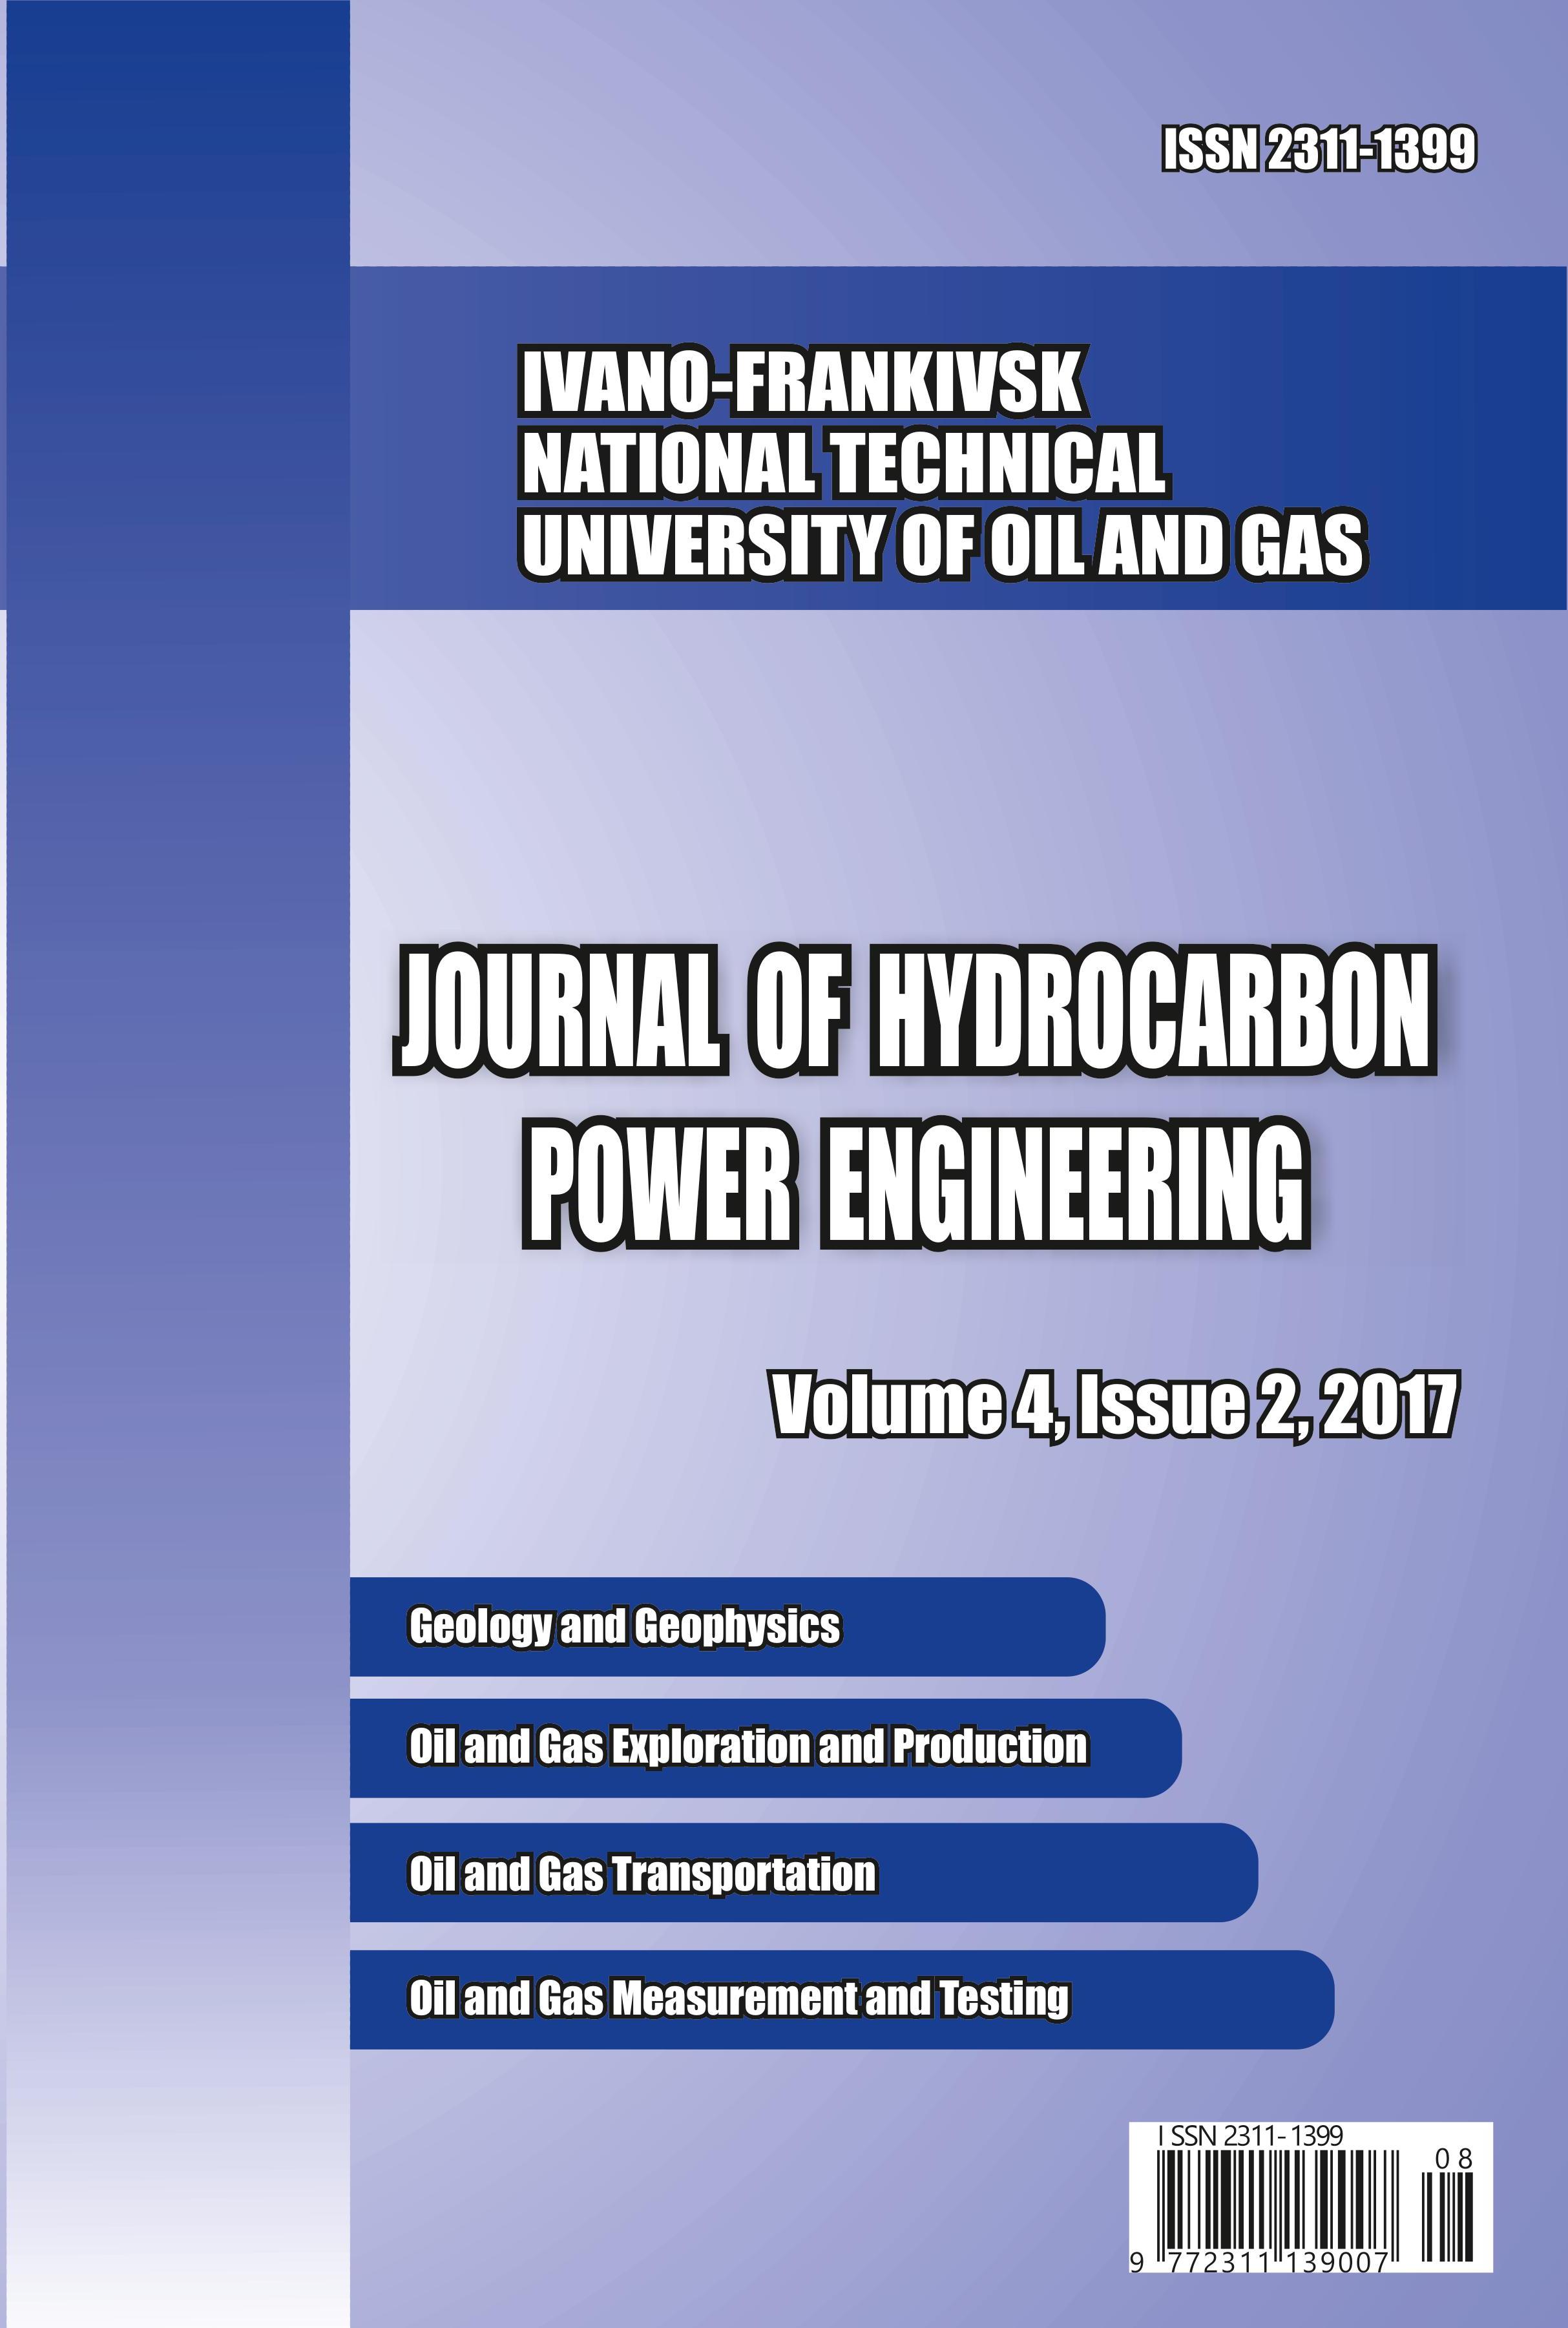 					View Vol. 4 No. 2 (2017): JOURNAL OF HYDROCARBON POWER ENGINEERING
				